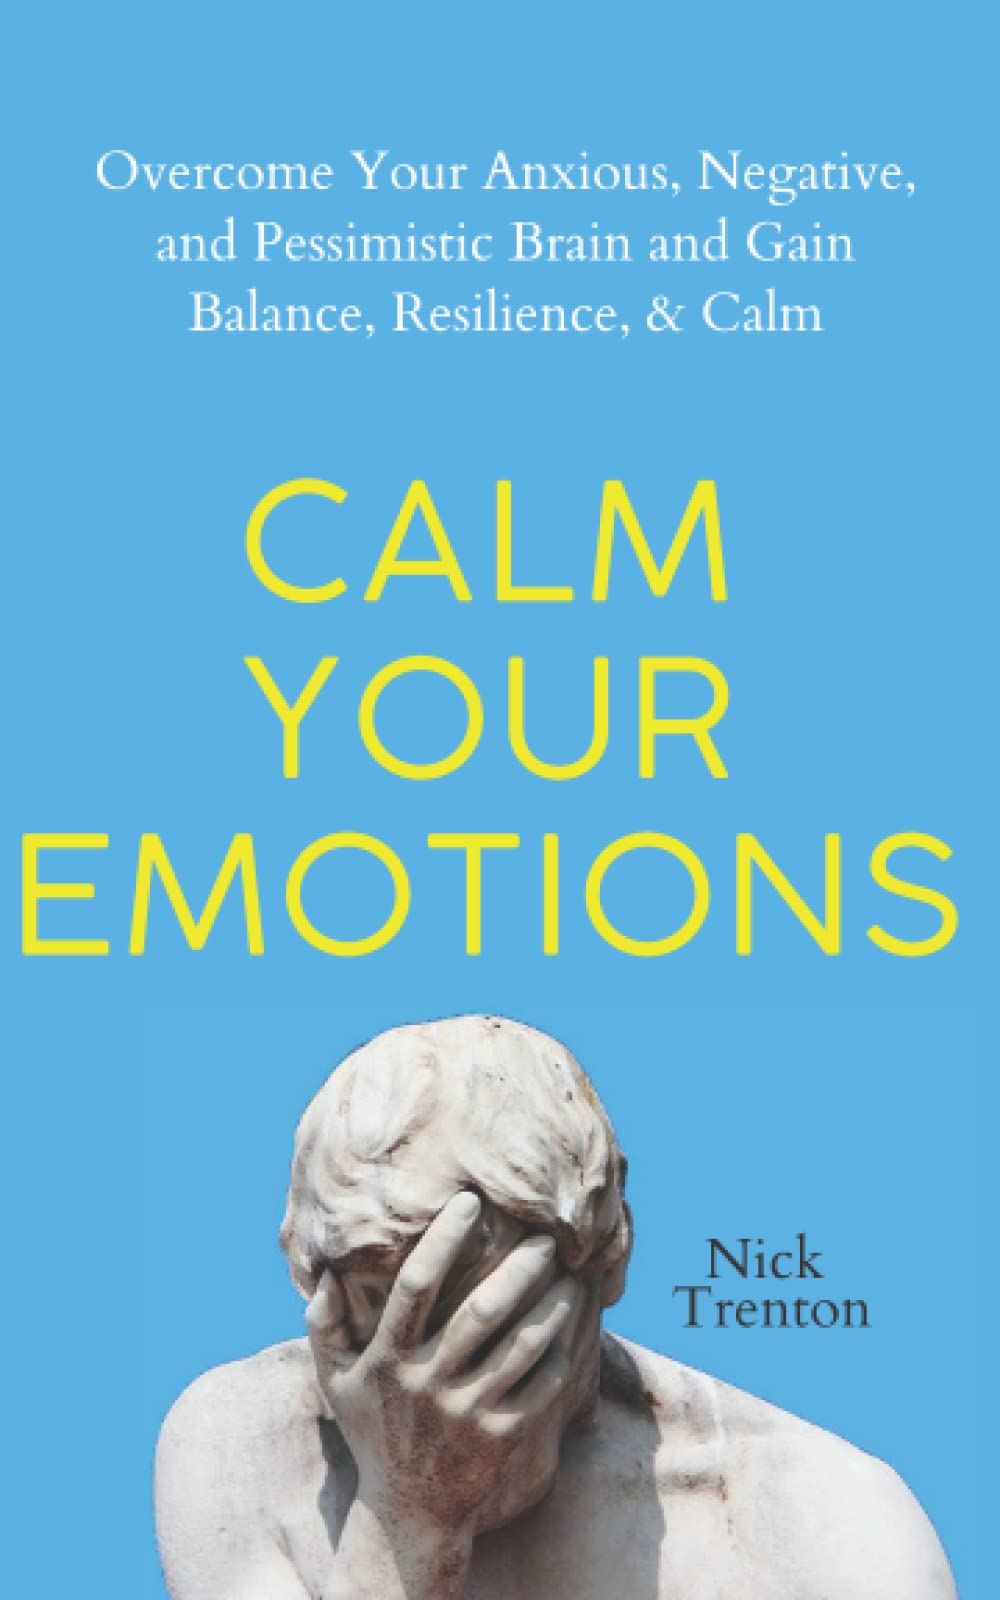 Calm Your Emotions: Overcome Your Anxious, Negative, and Pessimistic Brain and Find Balance, Resilience, & Calm (The Path to Calm)